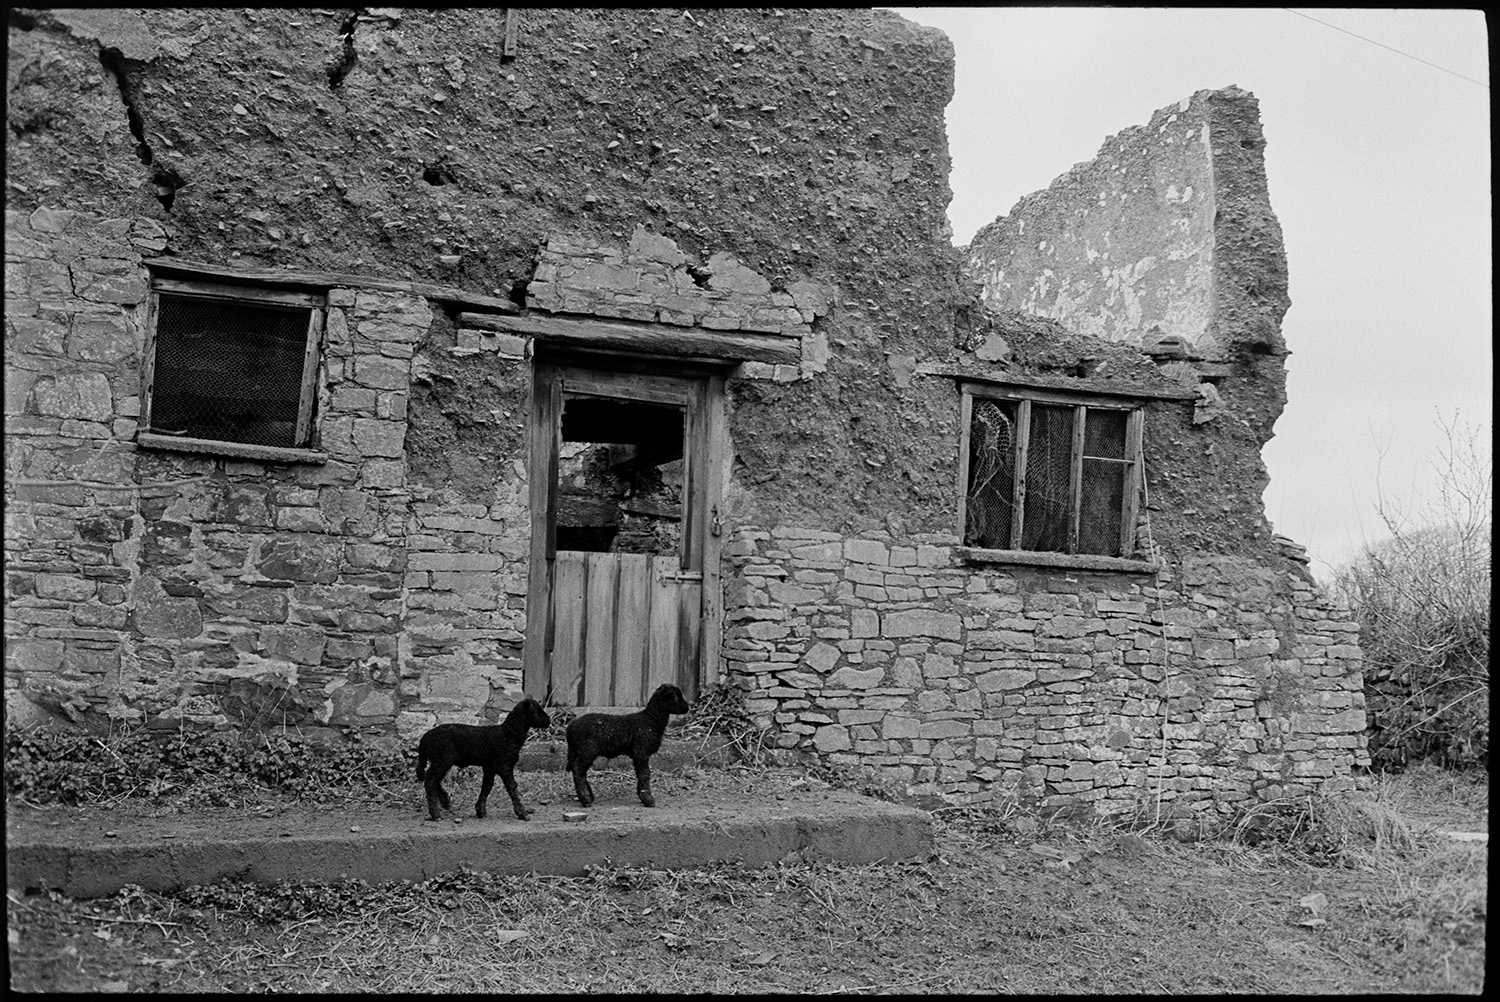 Two lambs stood outside the ruins of a stone and cob cottage. The wooden door and window frames of the cottage are also visible.